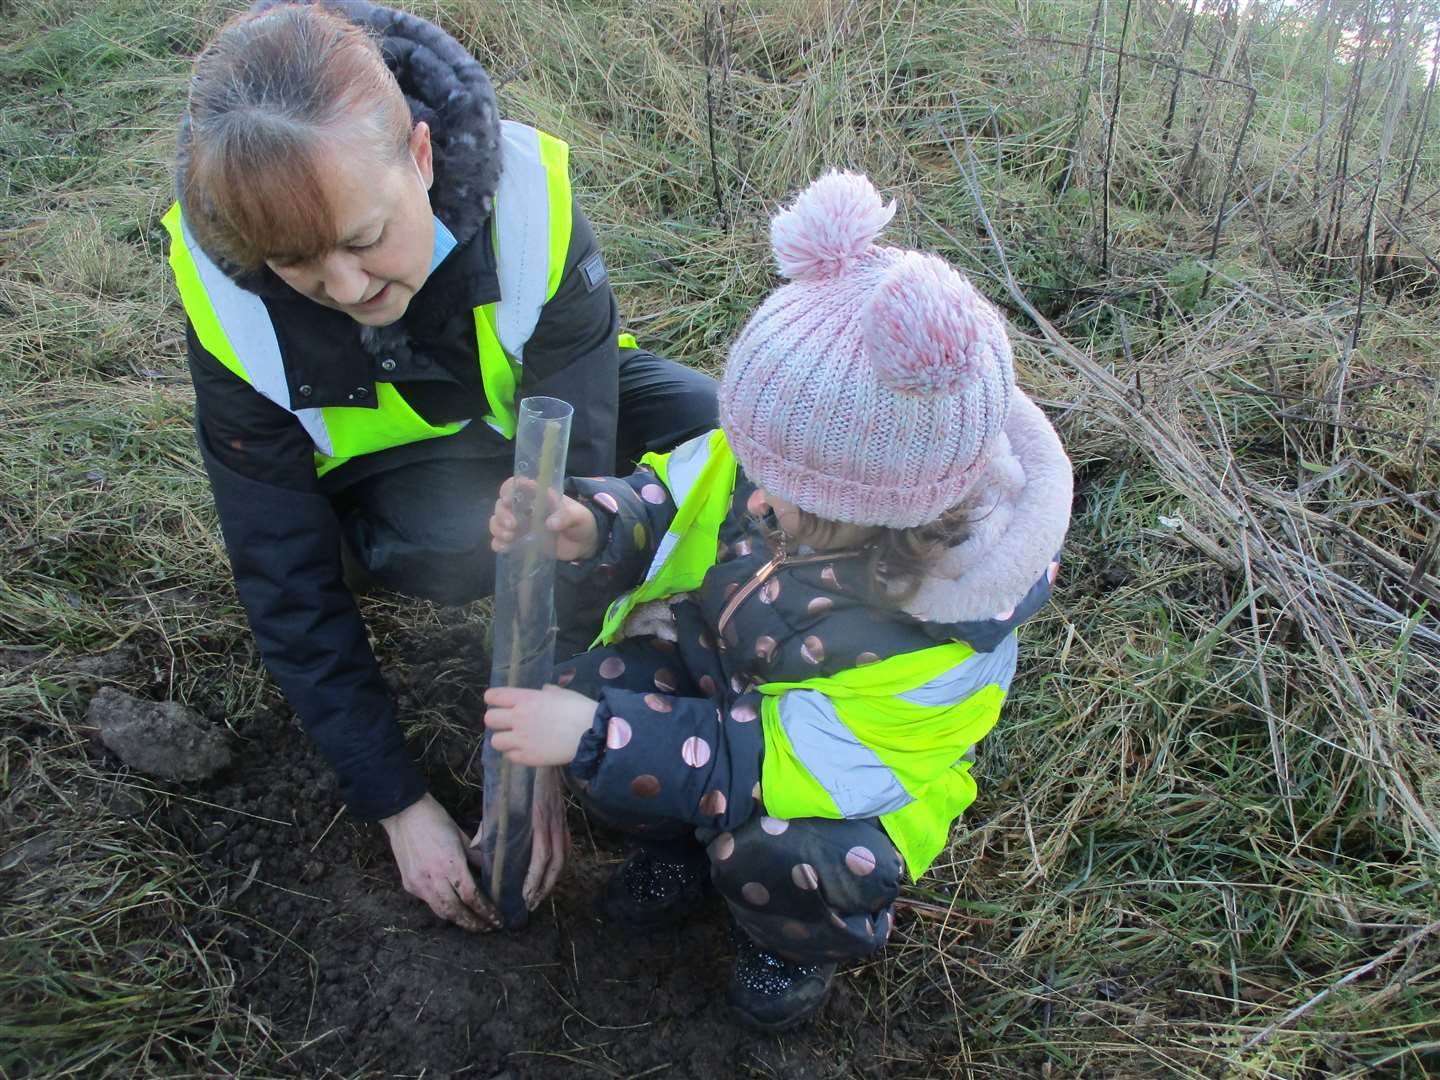 Keith Play Centre nursery manager Carlene Harding (left) helped children plant saplings as part of the Queen's platinum jubilee celebrations.